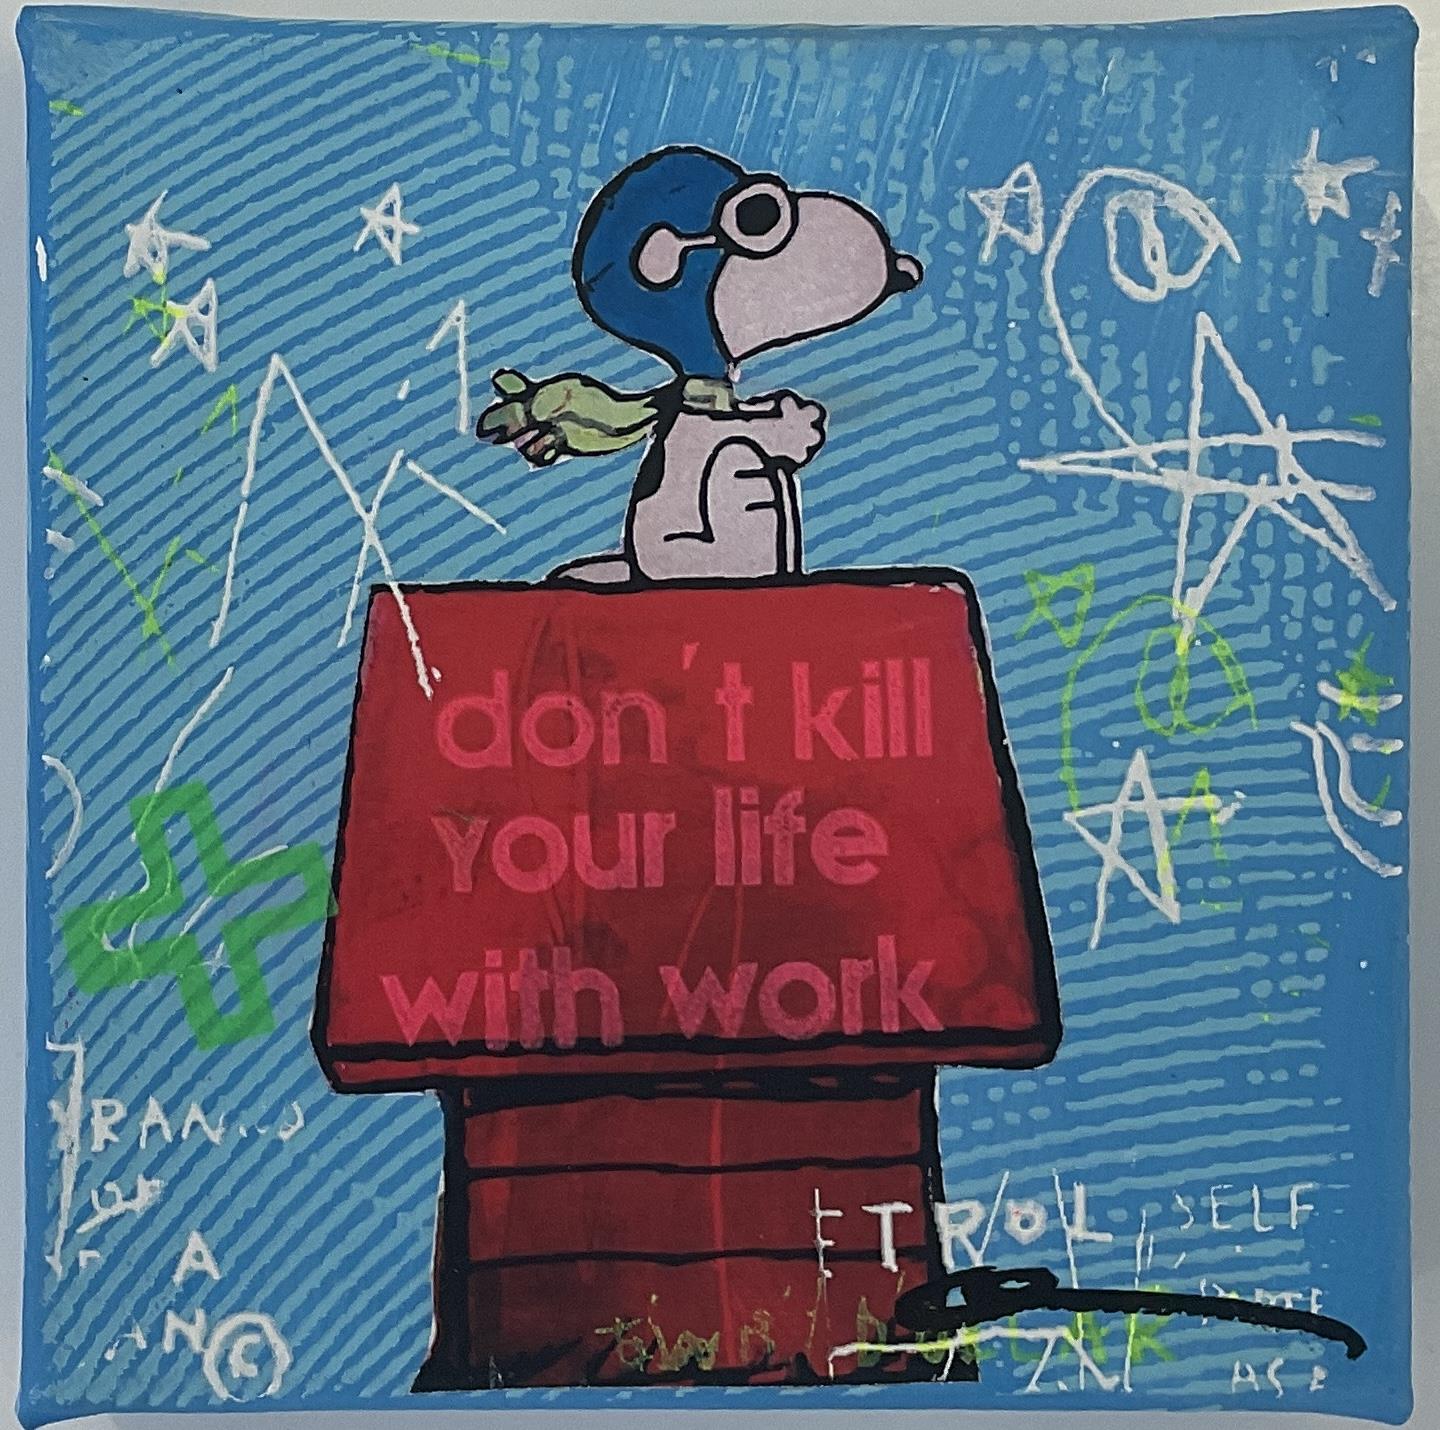 Don't kill your life with work - Flores, Anna - k-2407AF06